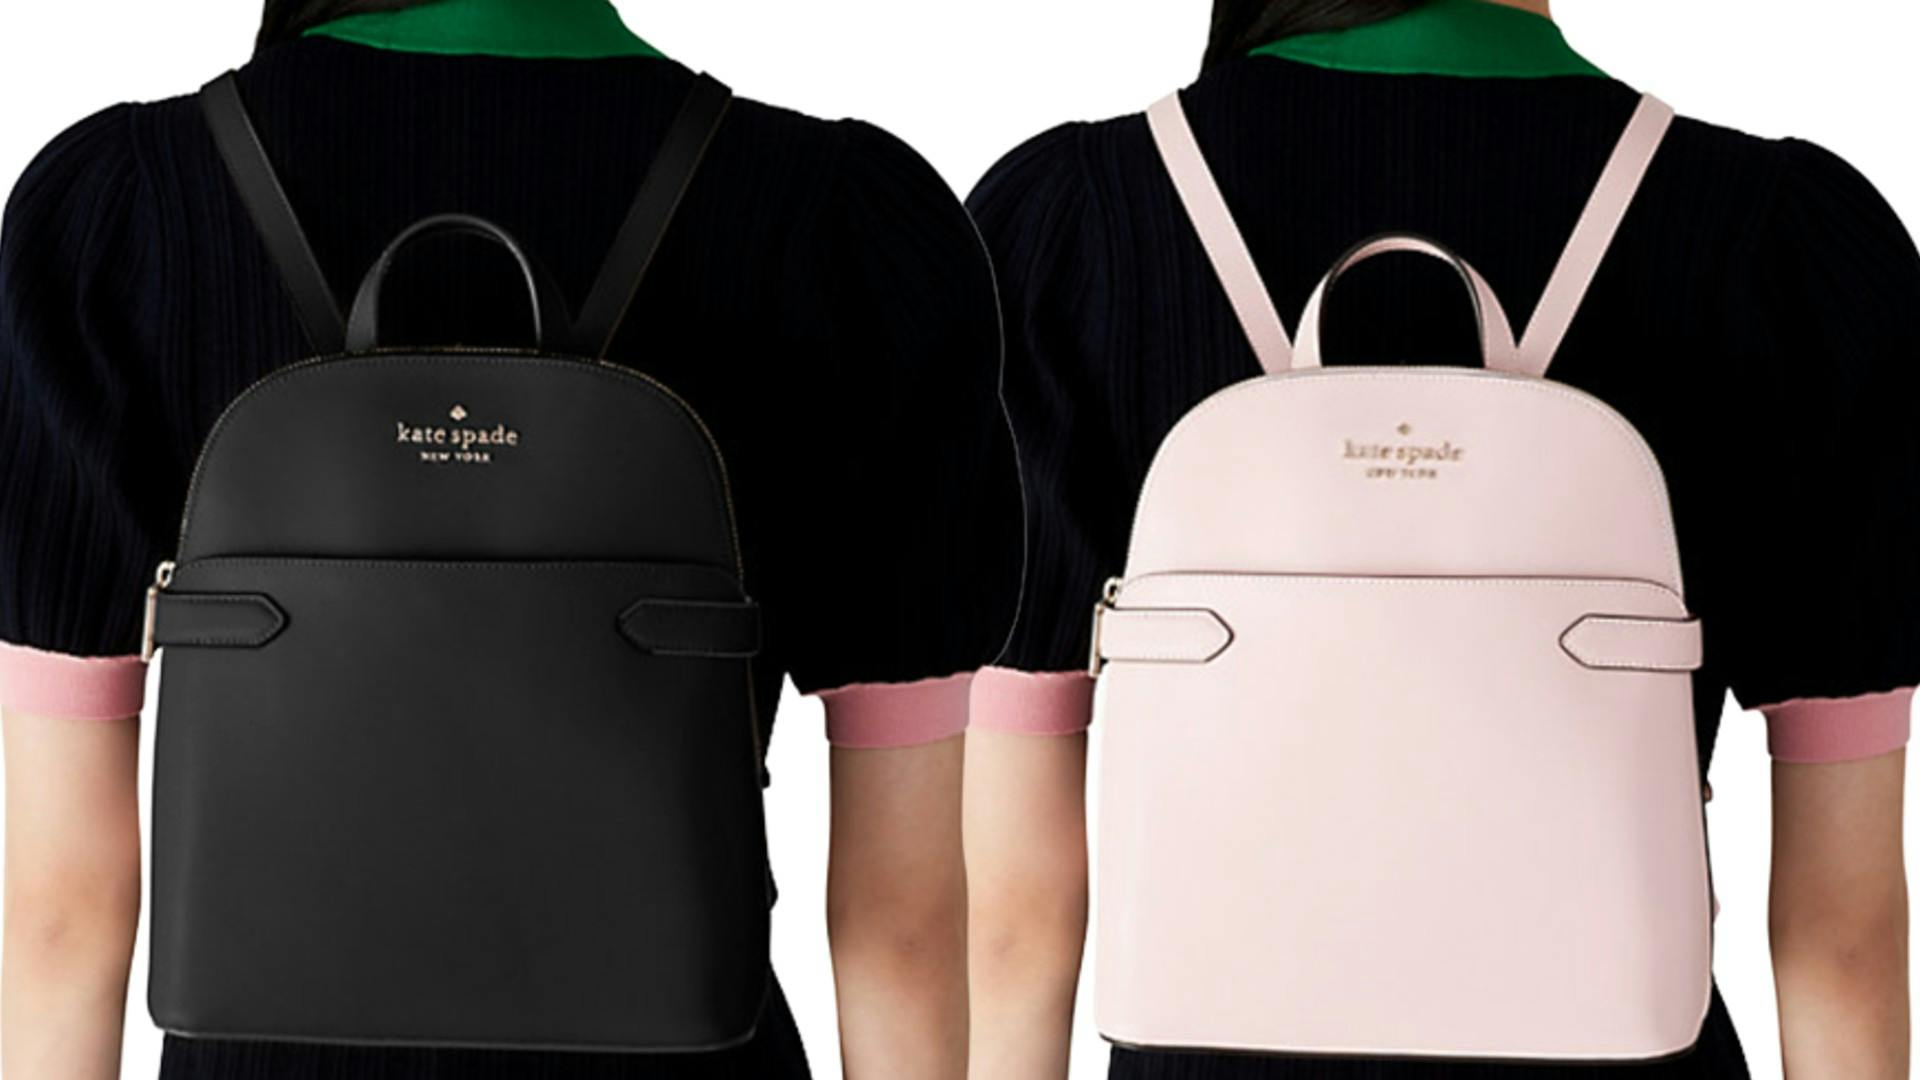 Kate Spade Dome Backpack, Just $99 (Reg. $359) - Today Only - The Krazy